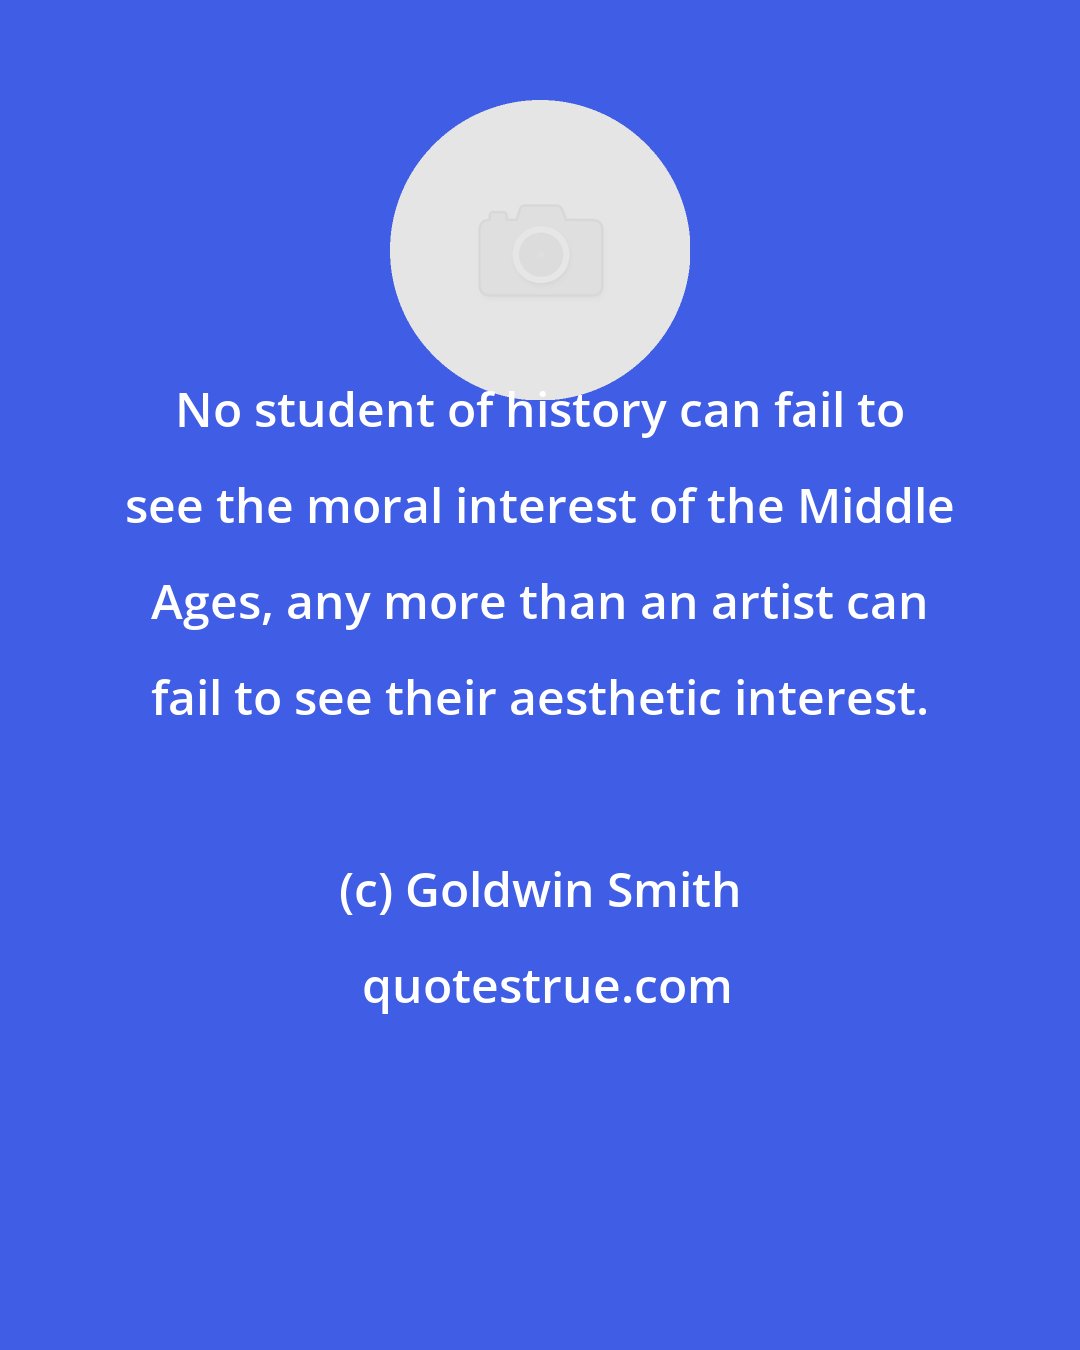 Goldwin Smith: No student of history can fail to see the moral interest of the Middle Ages, any more than an artist can fail to see their aesthetic interest.